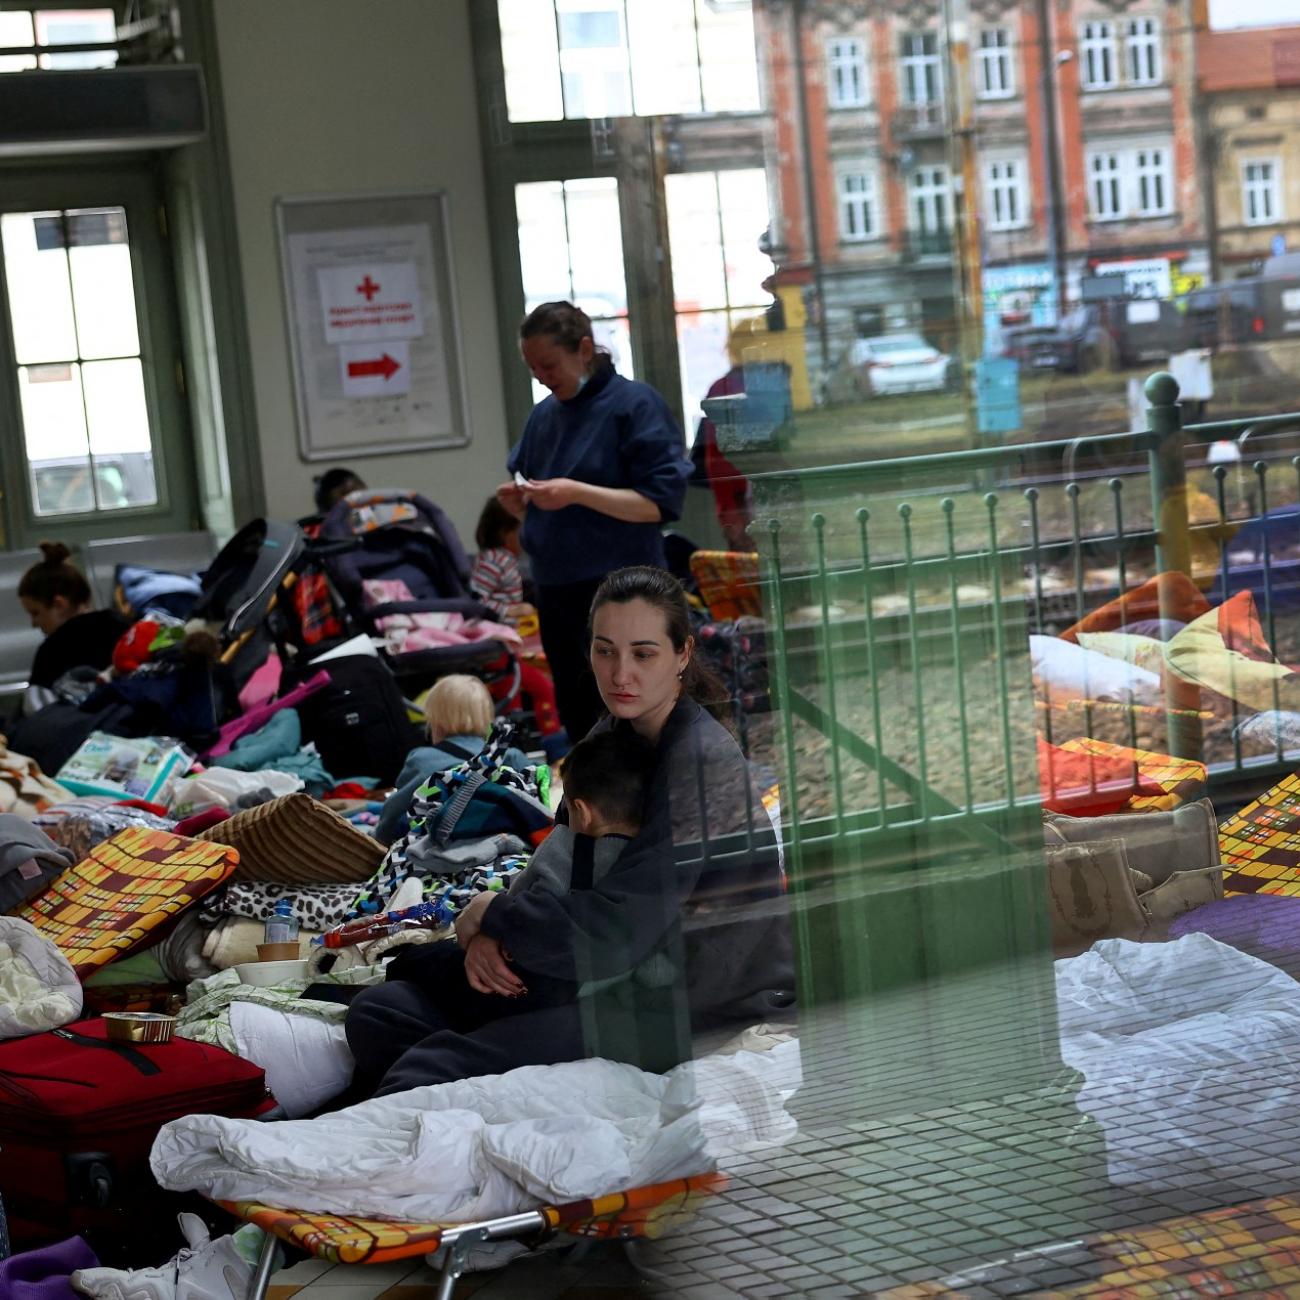 Refugees who fled from the Russian invasion in Ukraine rest inside a temporary camp at the train station in Przemysl, Poland, March 2, 2022.